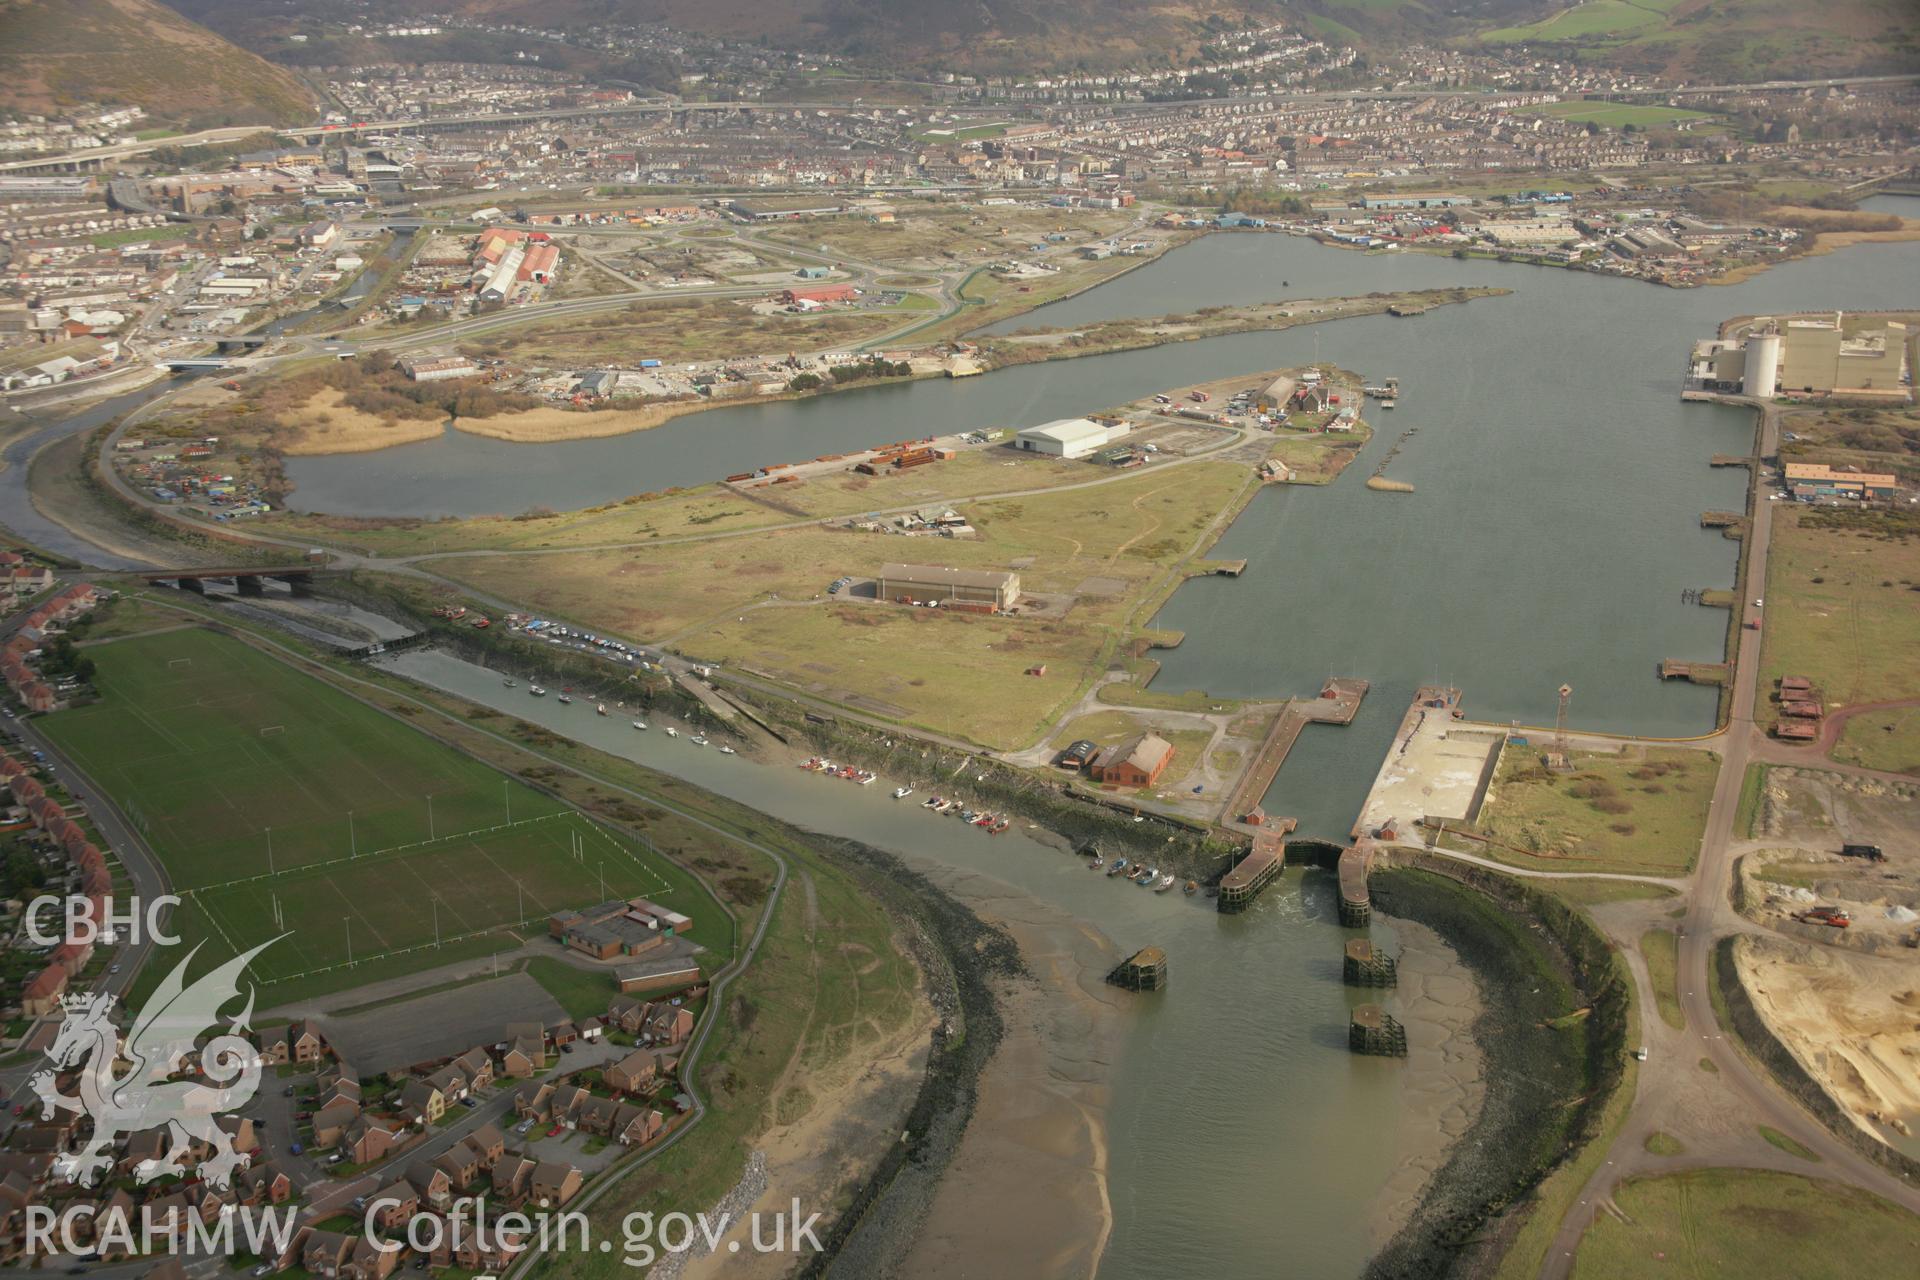 RCAHMW colour oblique aerial photograph of Port Talbot Docks. Taken on 16 March 2007 by Toby Driver